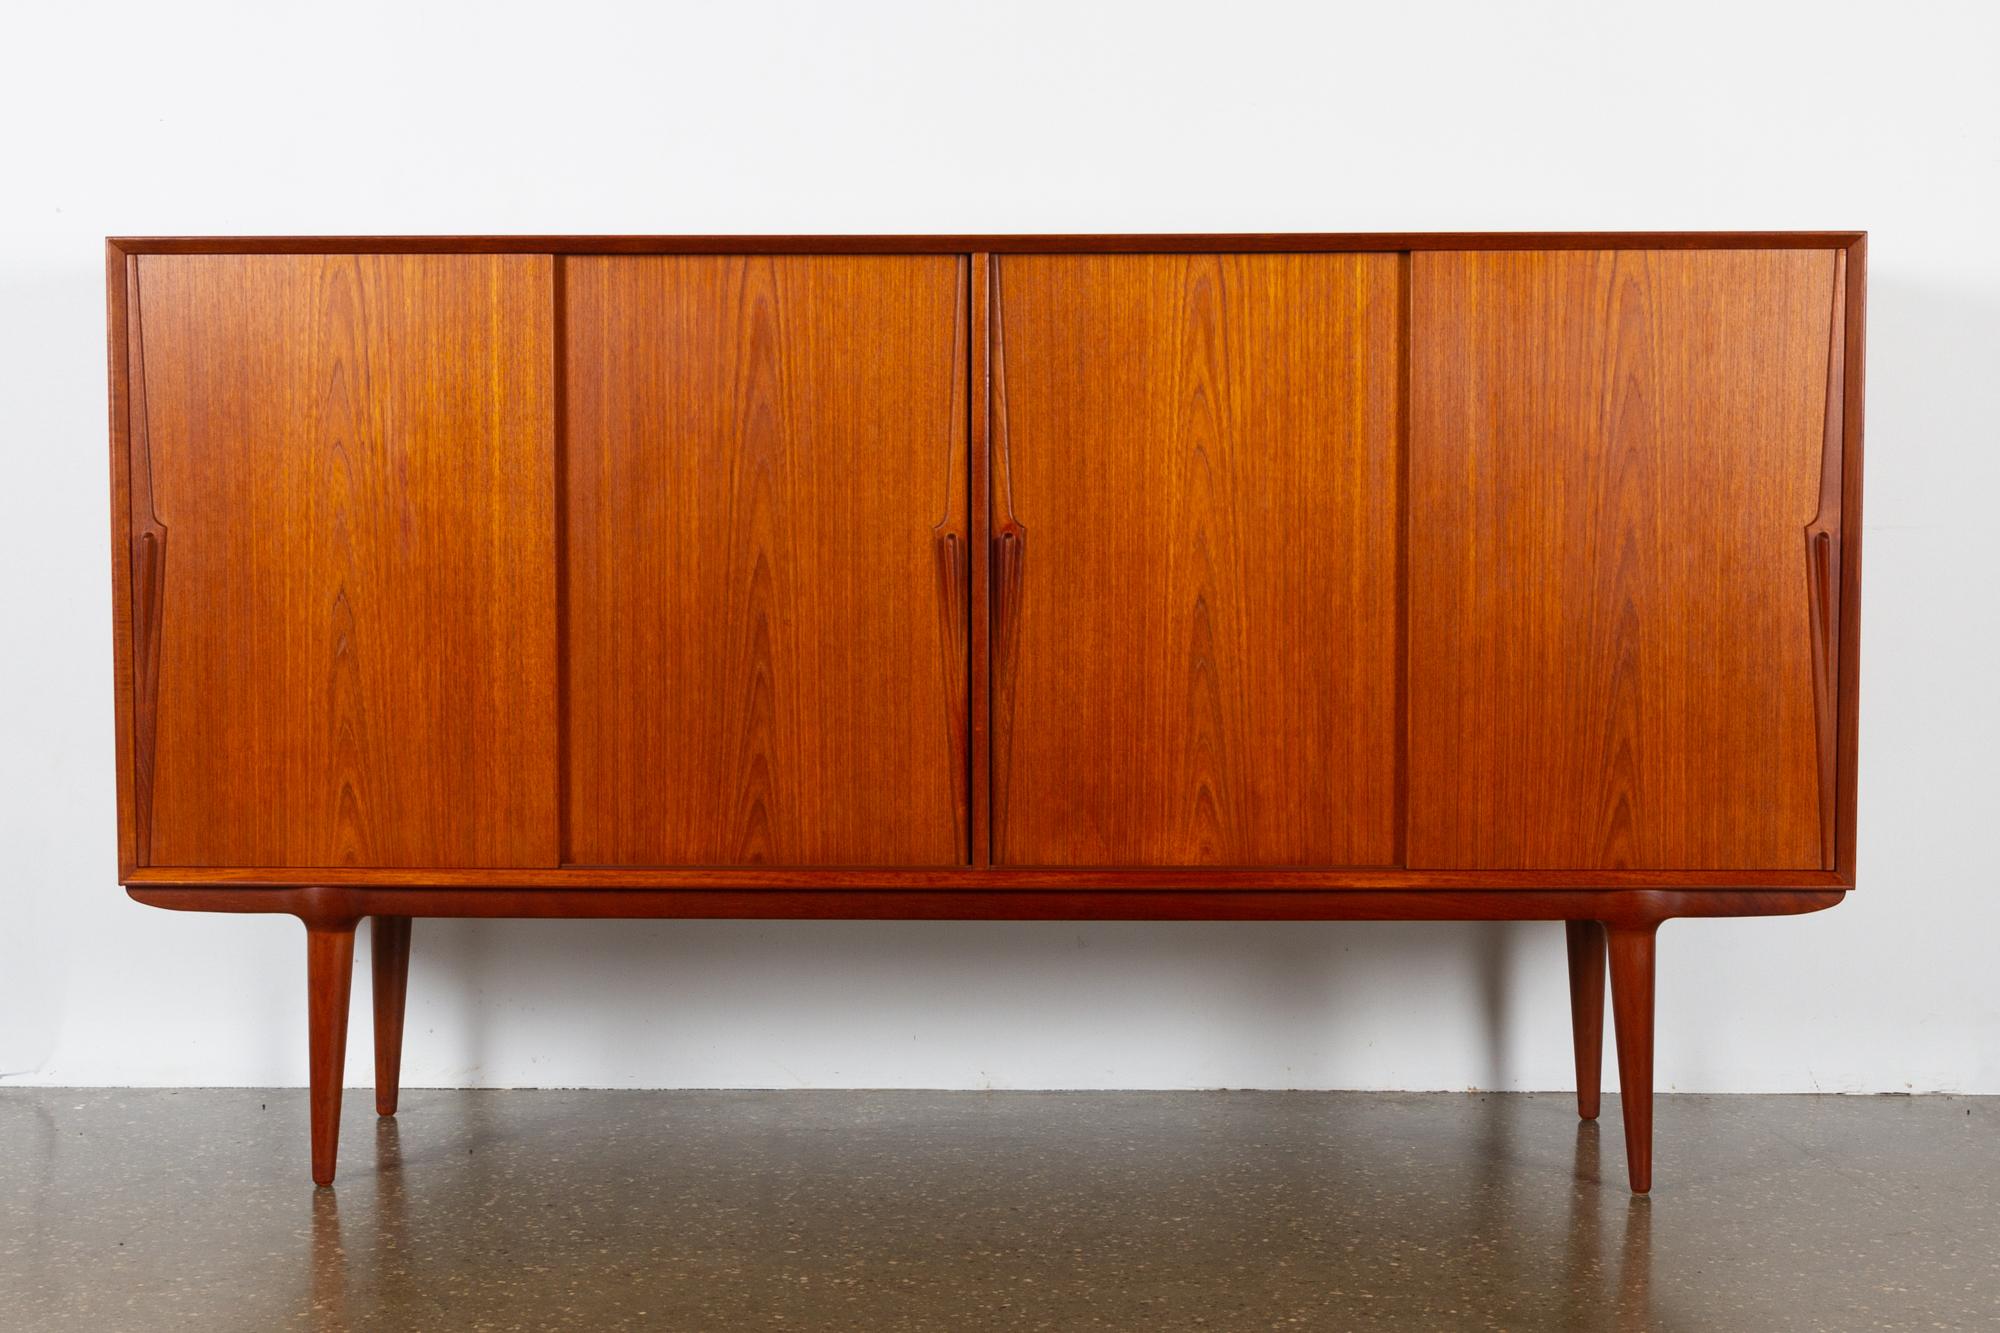 Vintage Danish teak credenza by Omann Jun, 1960s
Large and spacious teak high board model no. 19 by Danish manufacturer Omann Jun A/S.

Very high quality and craftsmanship. Many beautiful details and amazing joinery. Especially the joint between